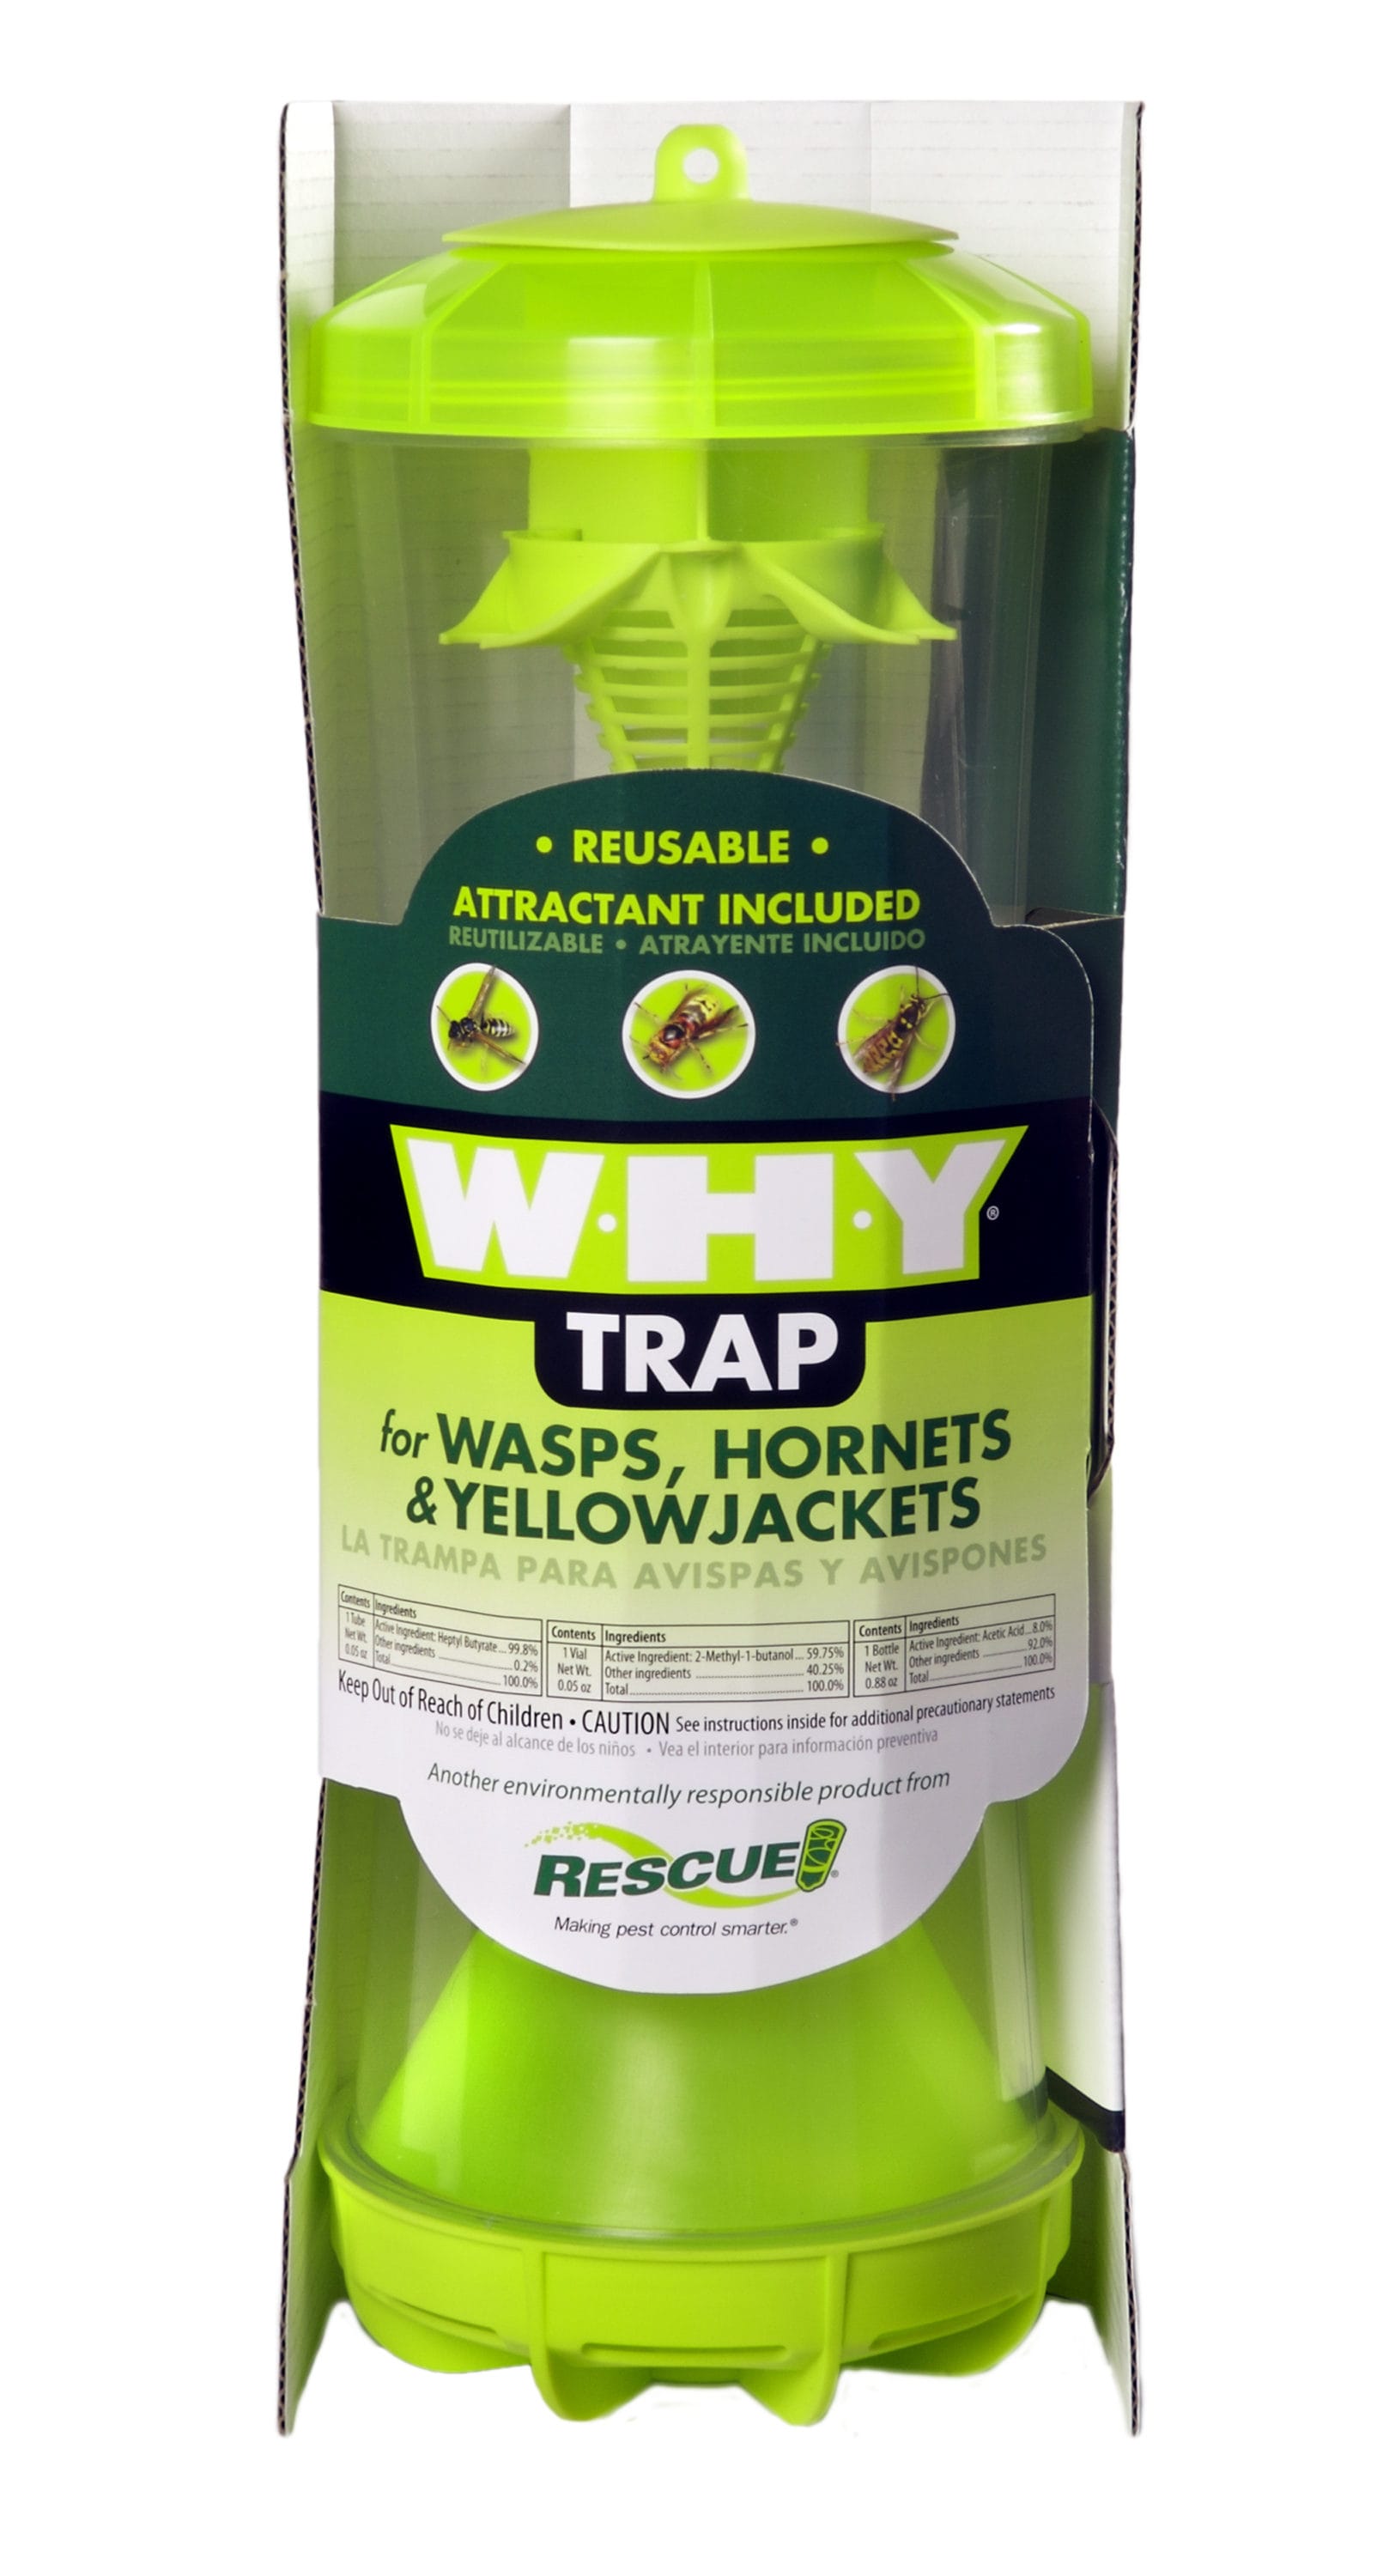 WHYTR-BB8 WHY Wasp Hornet & Yellowjacket Traps RESCUE Quantity 4 